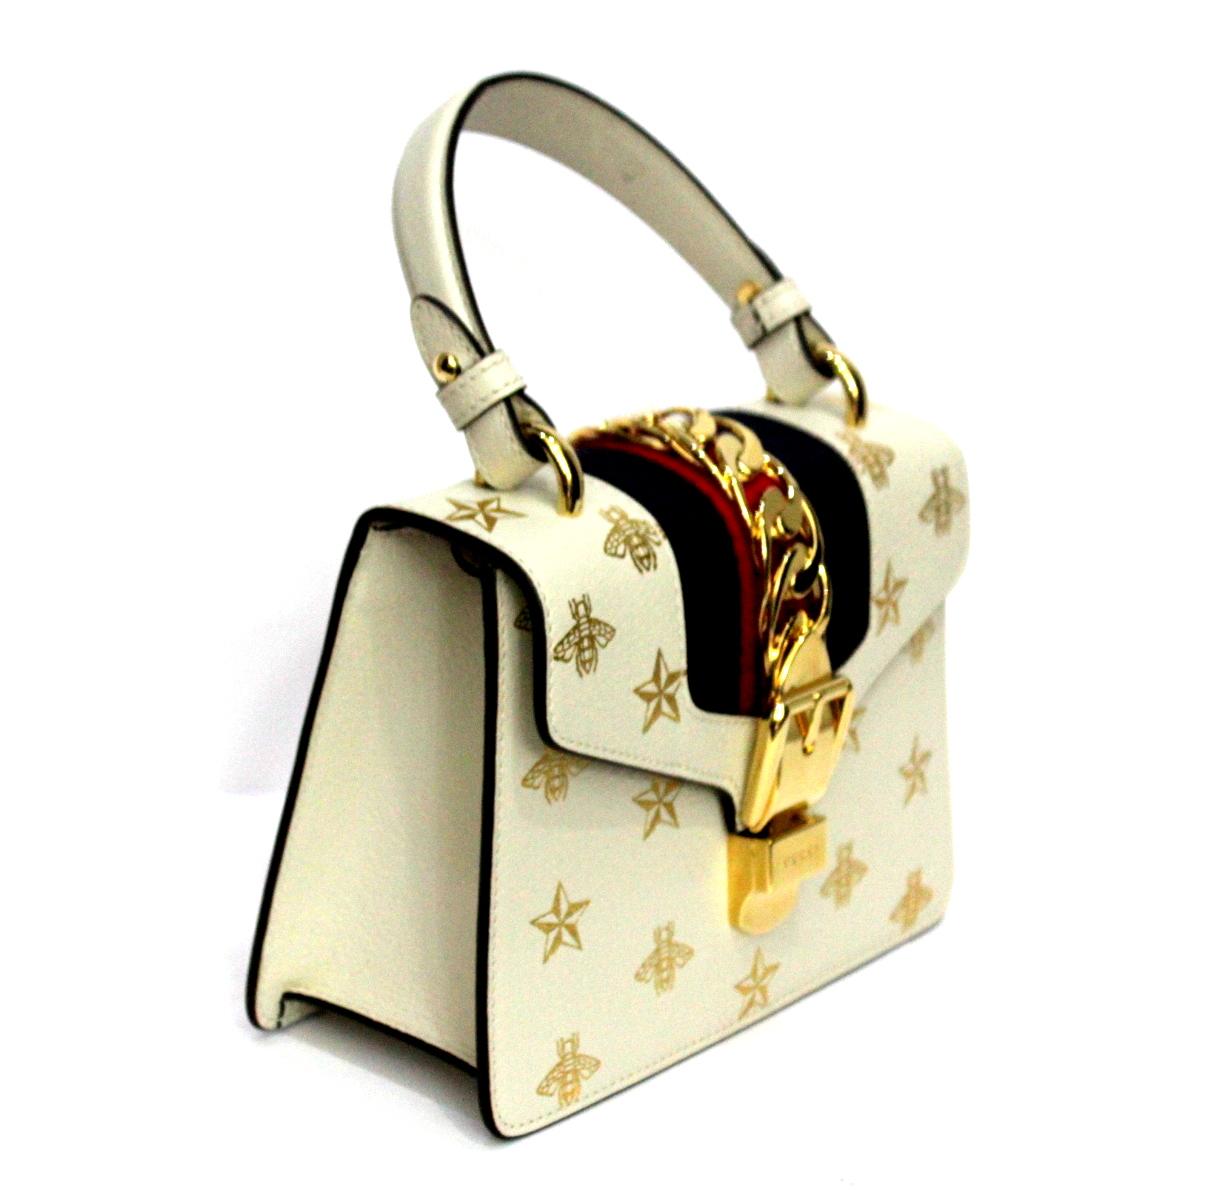 Fantastic Gucci Sylvie Bee Star line bag in its mini size Made of white leather with bees print and gold stars. Gold hardware, enriched by the classic red and blue Web tape. Closure with hook, internally large for the essentials, Equipped with a